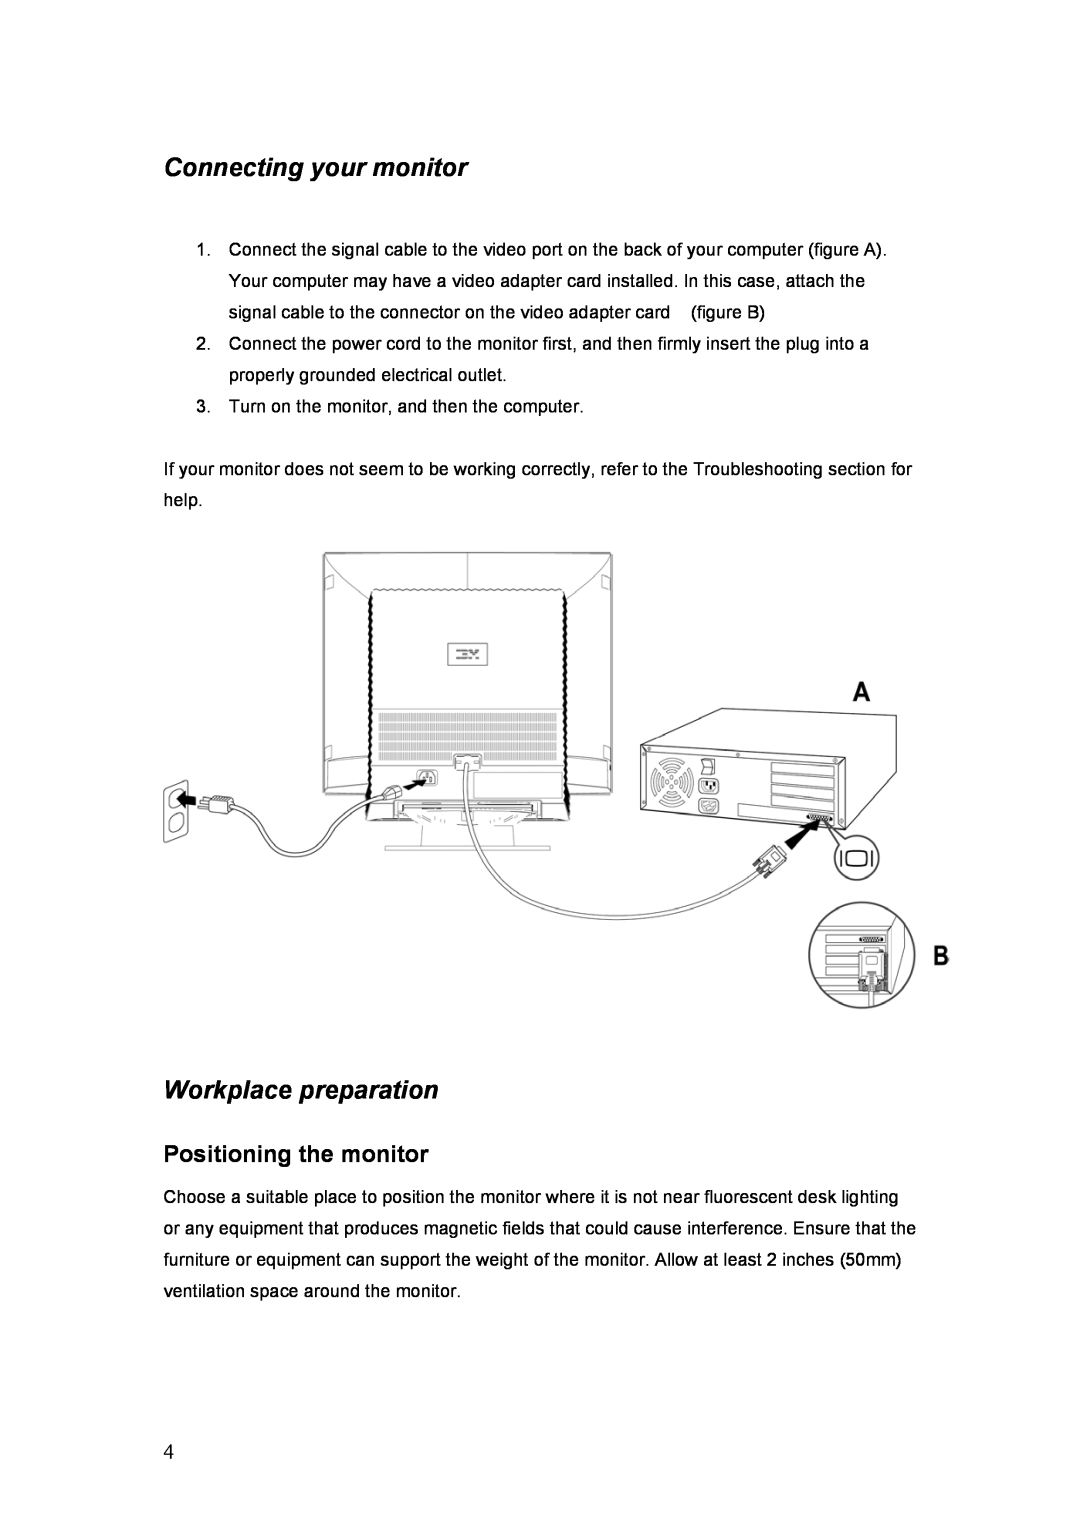 IBM C190 manual Connecting your monitor, Workplace preparation, Positioning the monitor 